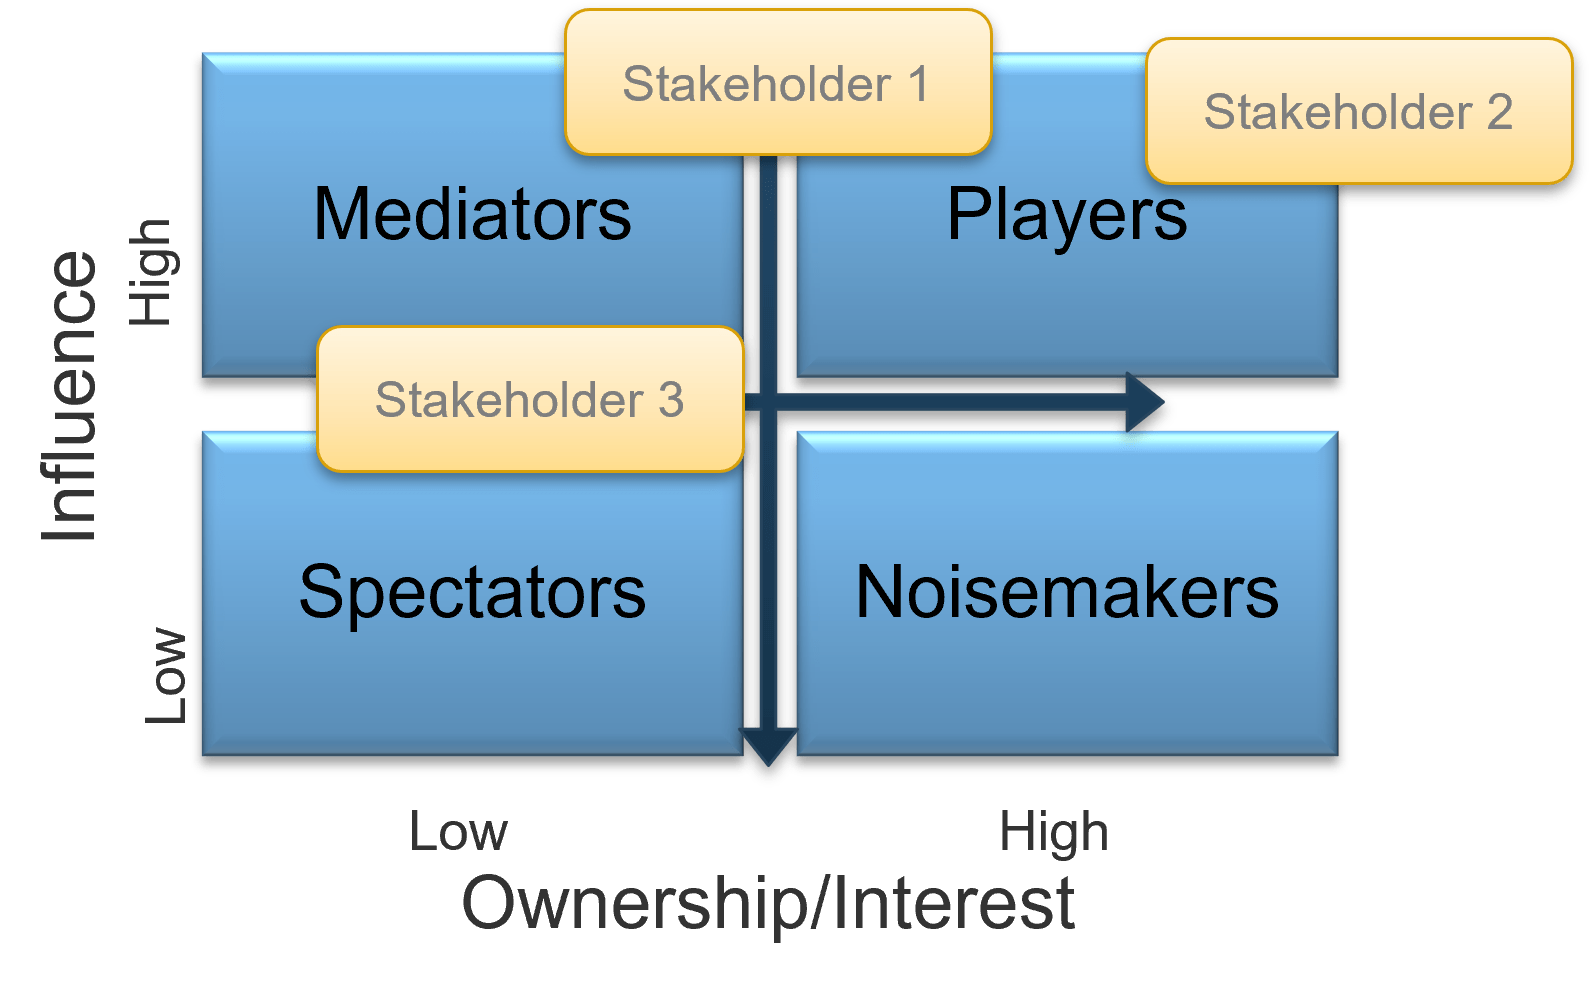 Stakeholder prioritization map with example 'Stakeholders' placed in or across the four quadrants.